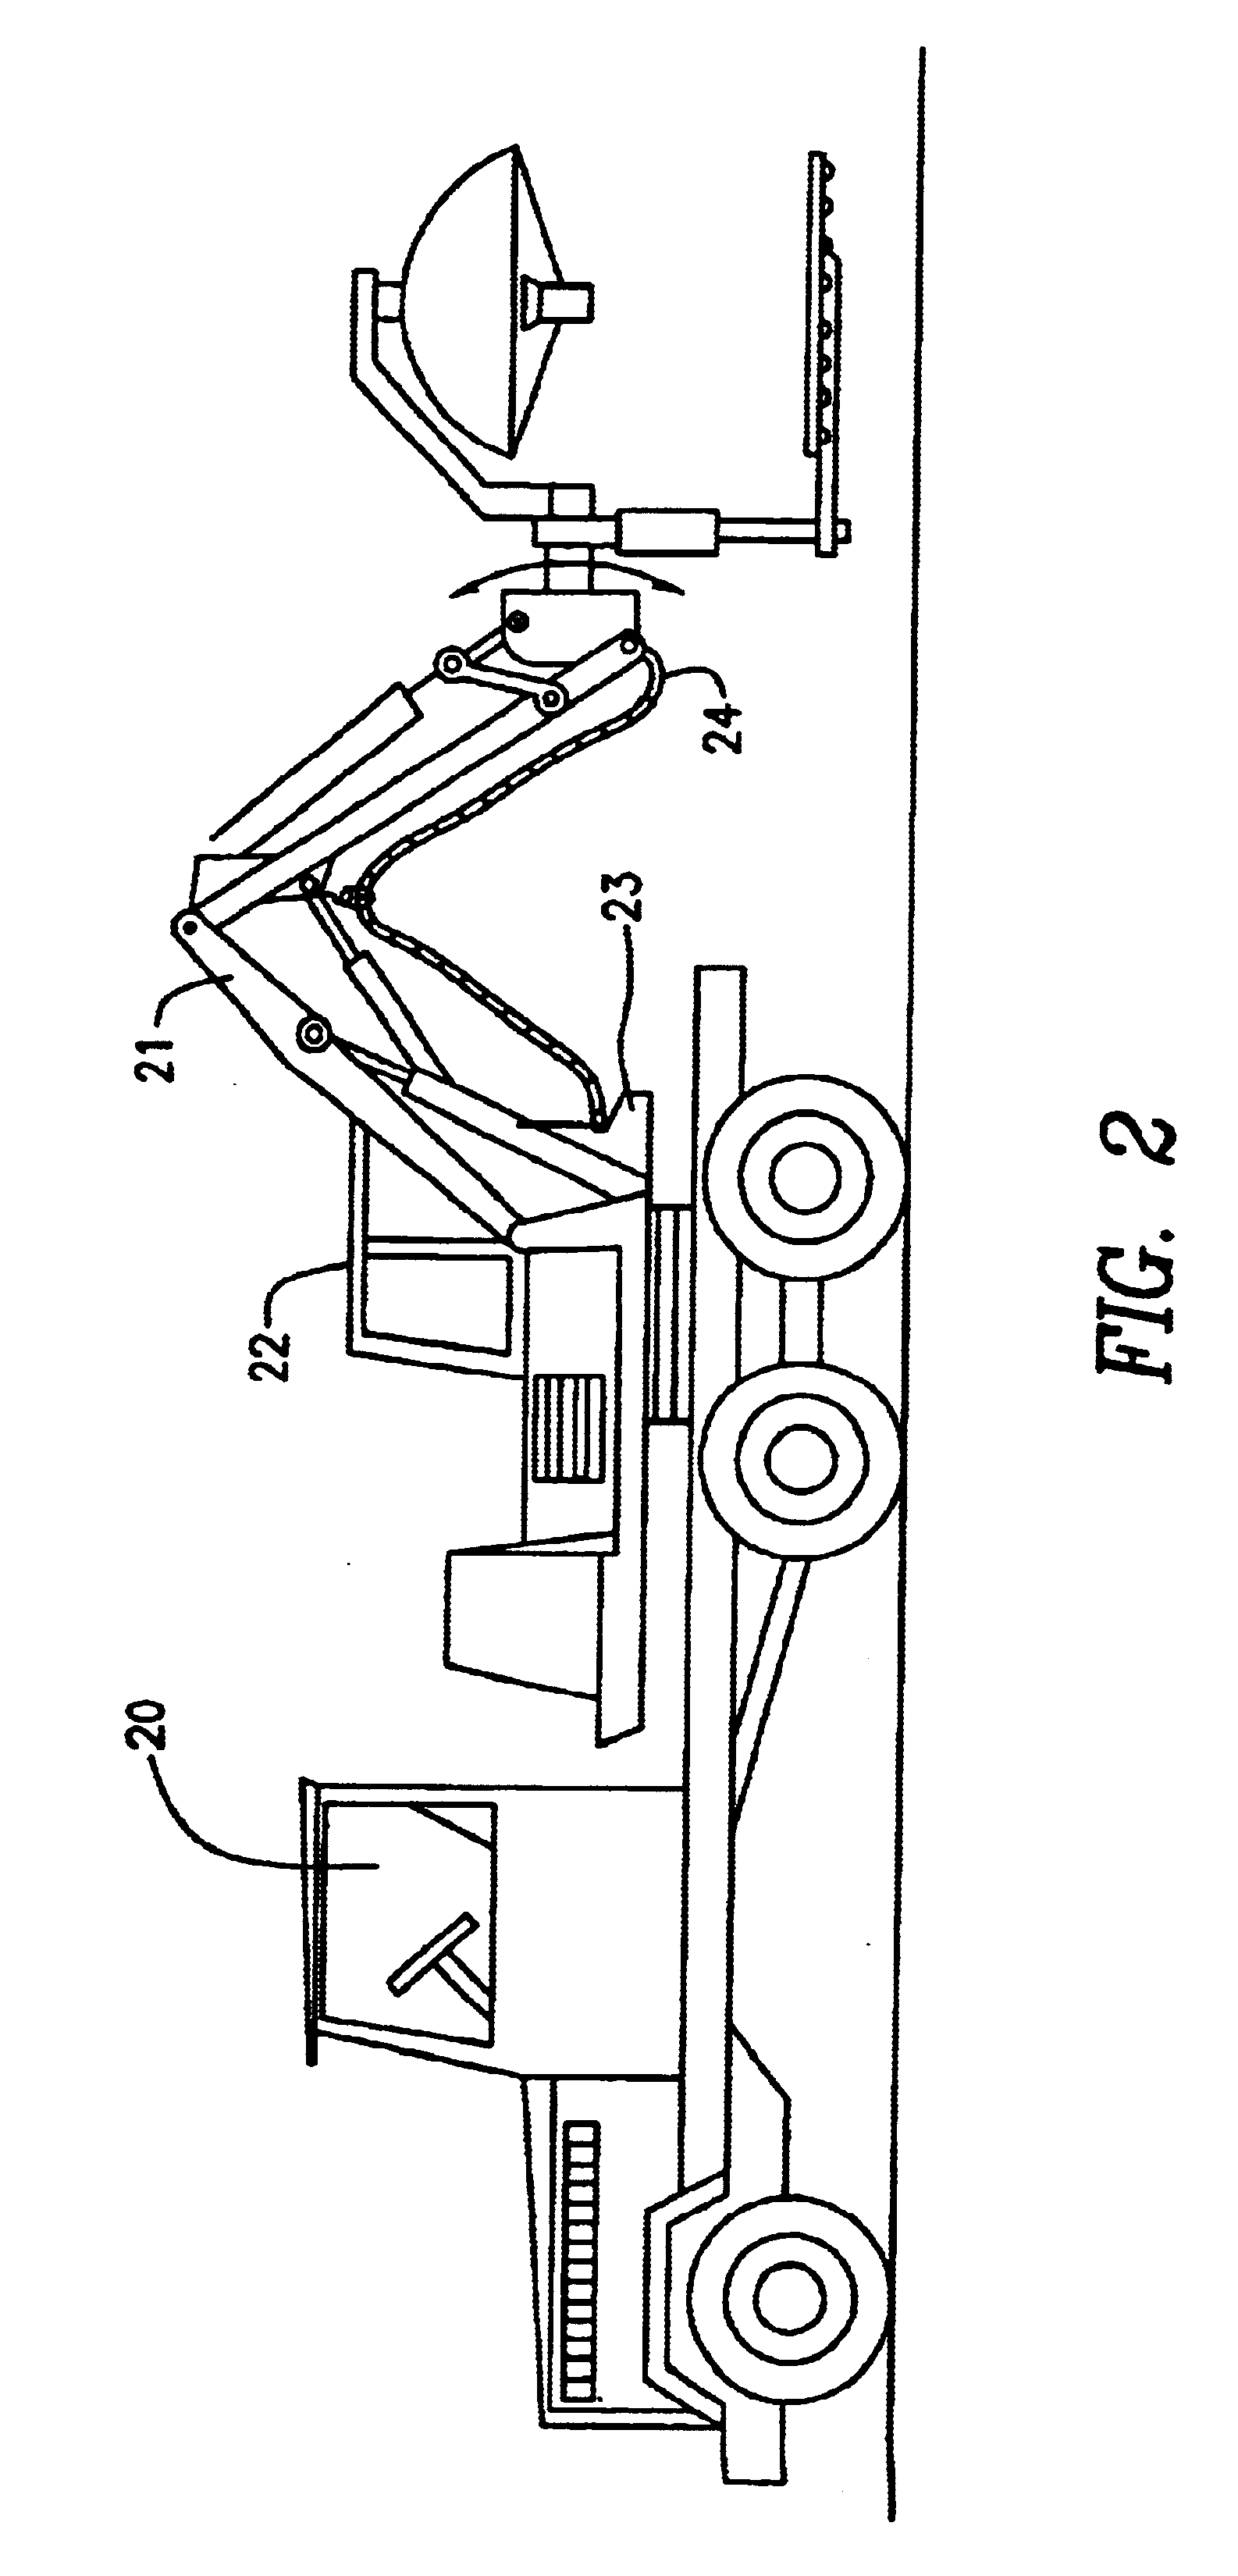 Method and system for exterminating pests, weeds and pathogens